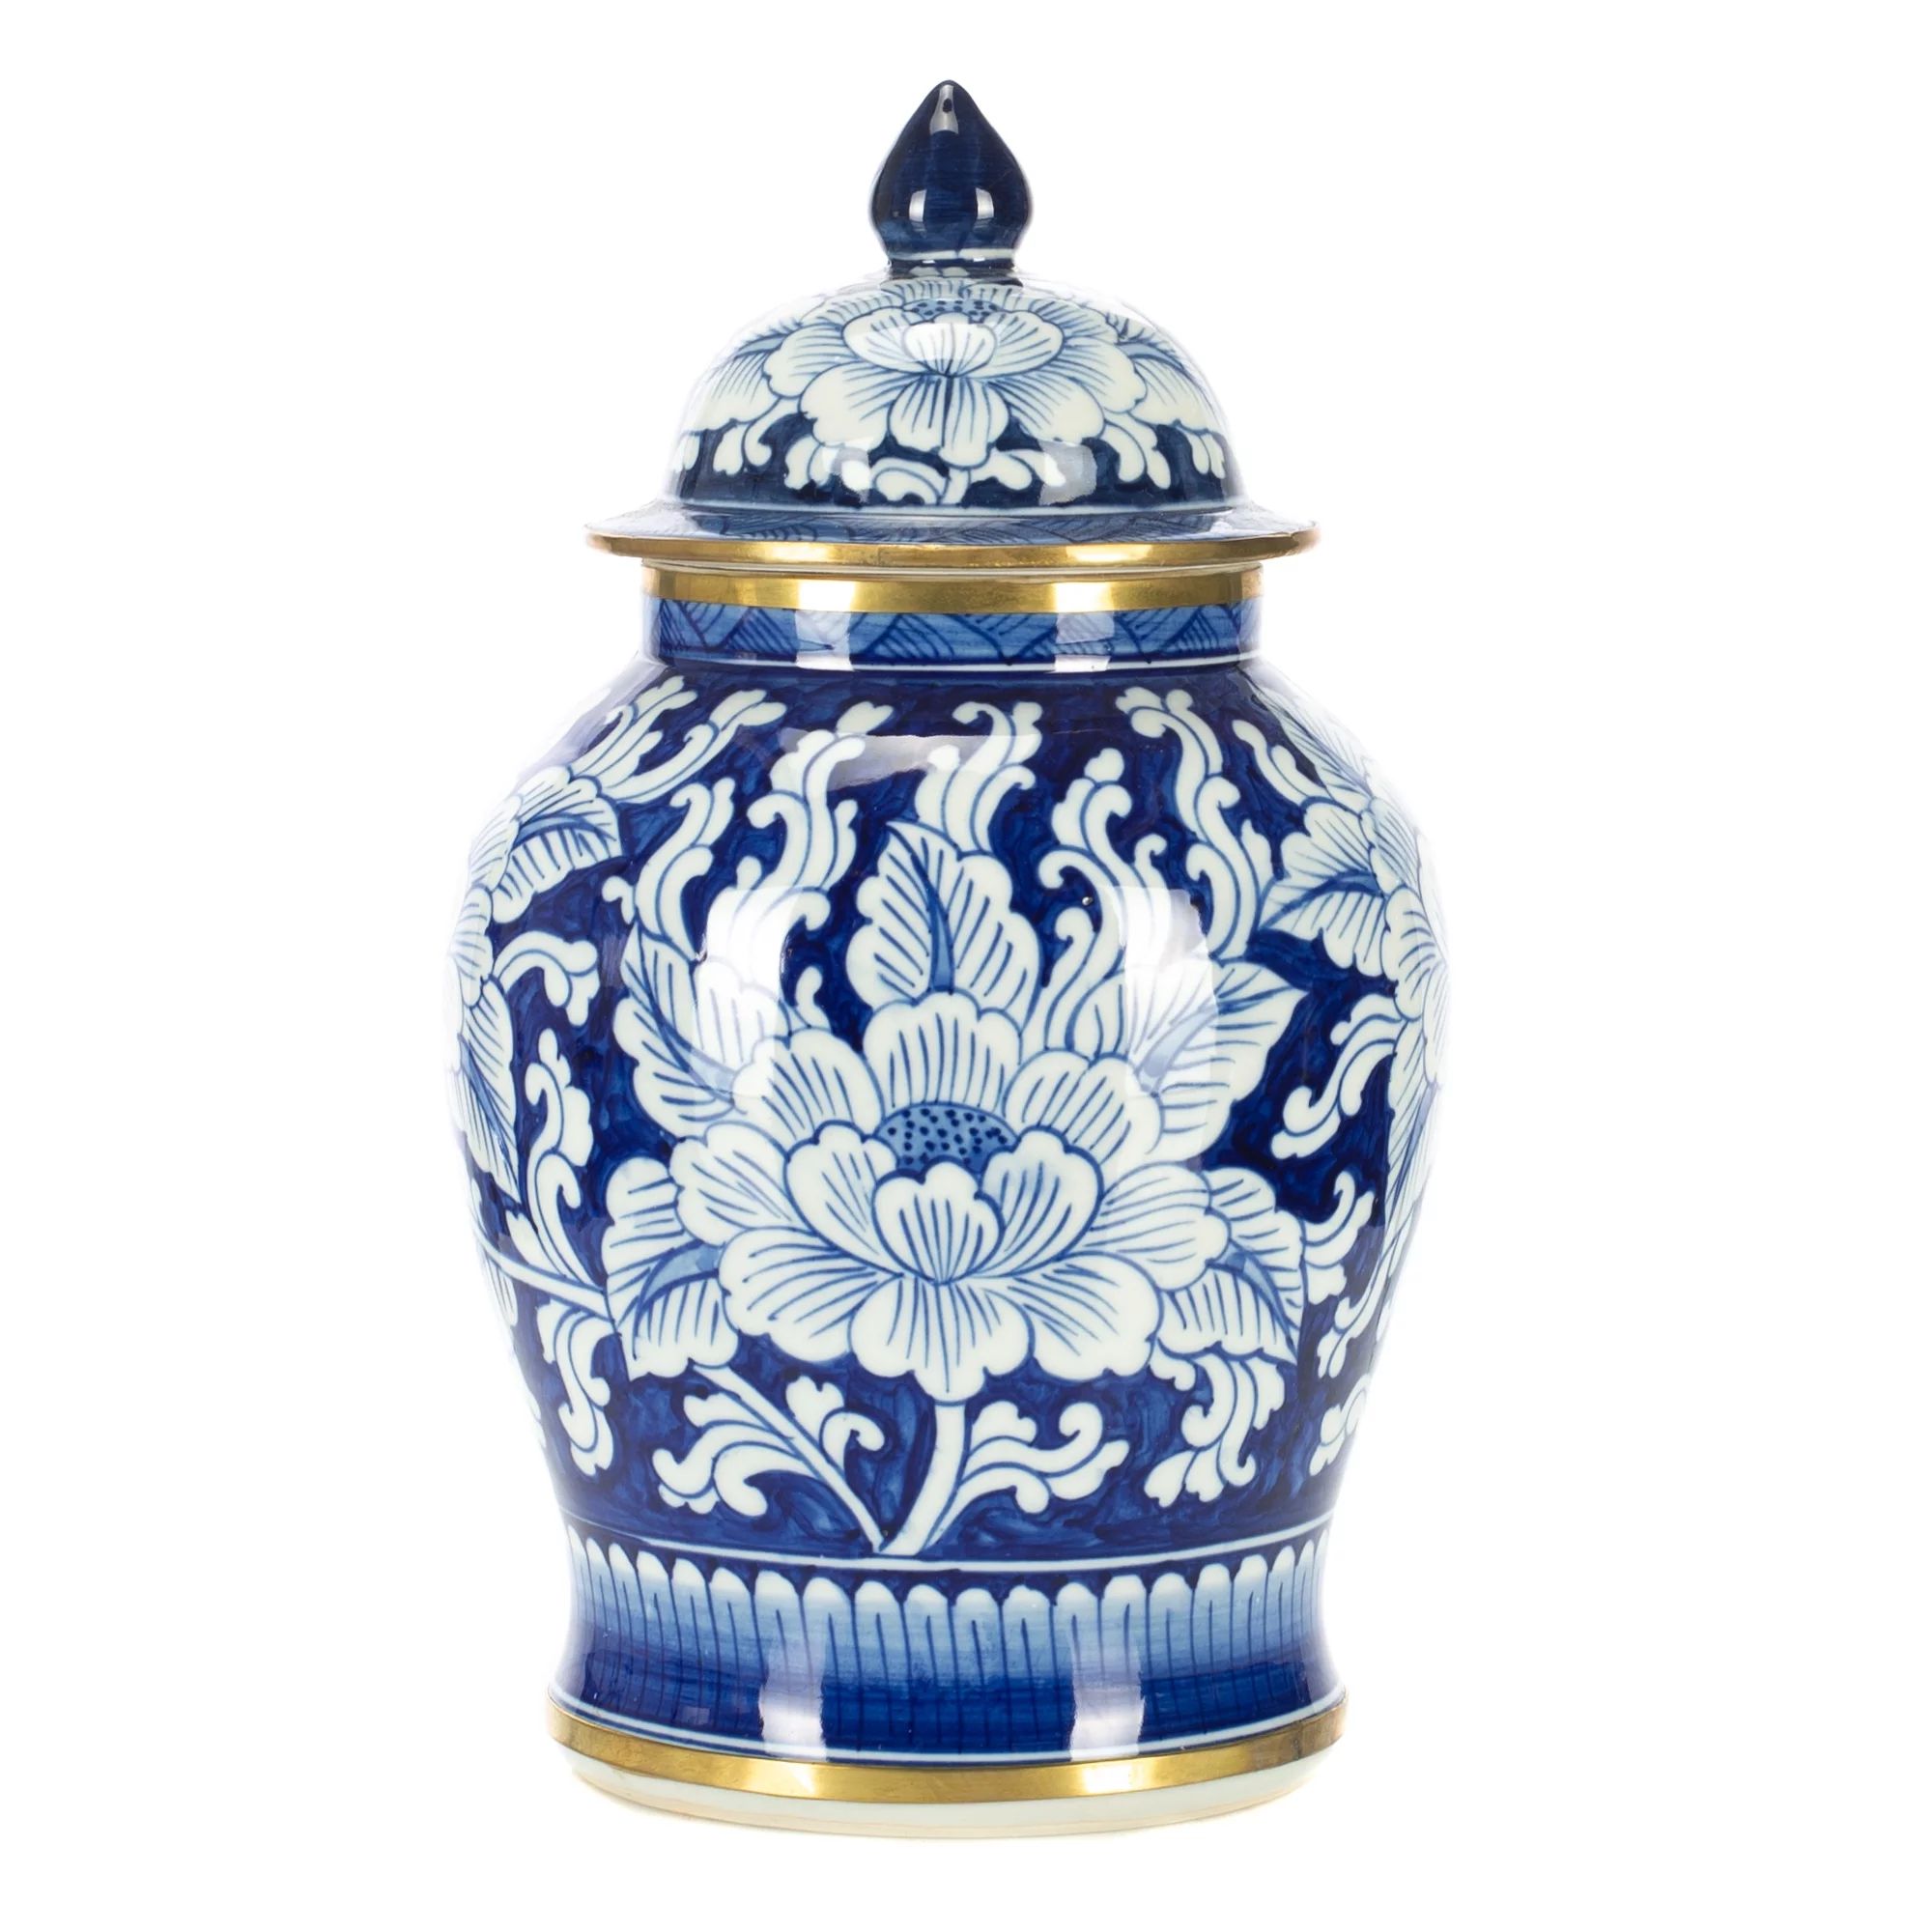 Peony Ginger Blue and White 10 inch Porcelain Ceramic and Brass Decorative Jar | Walmart (US)